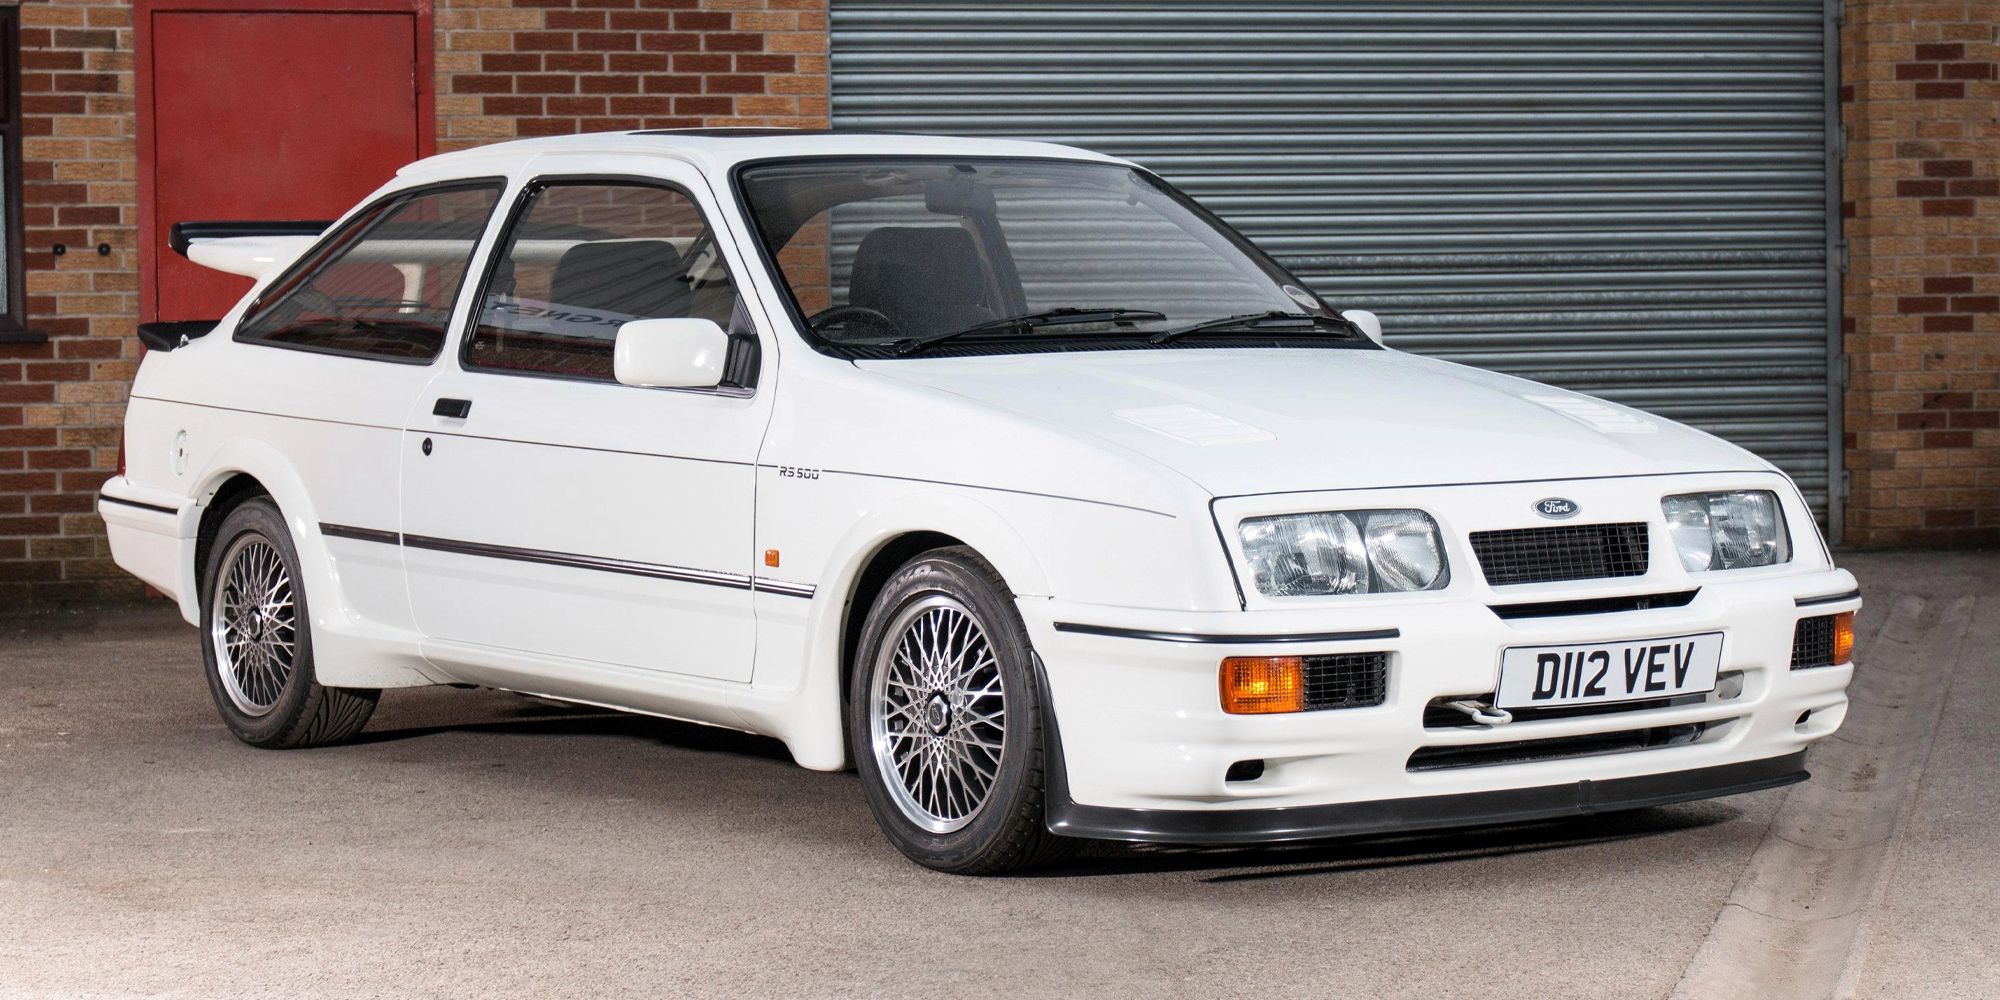 The front of the Sierra Cosworth